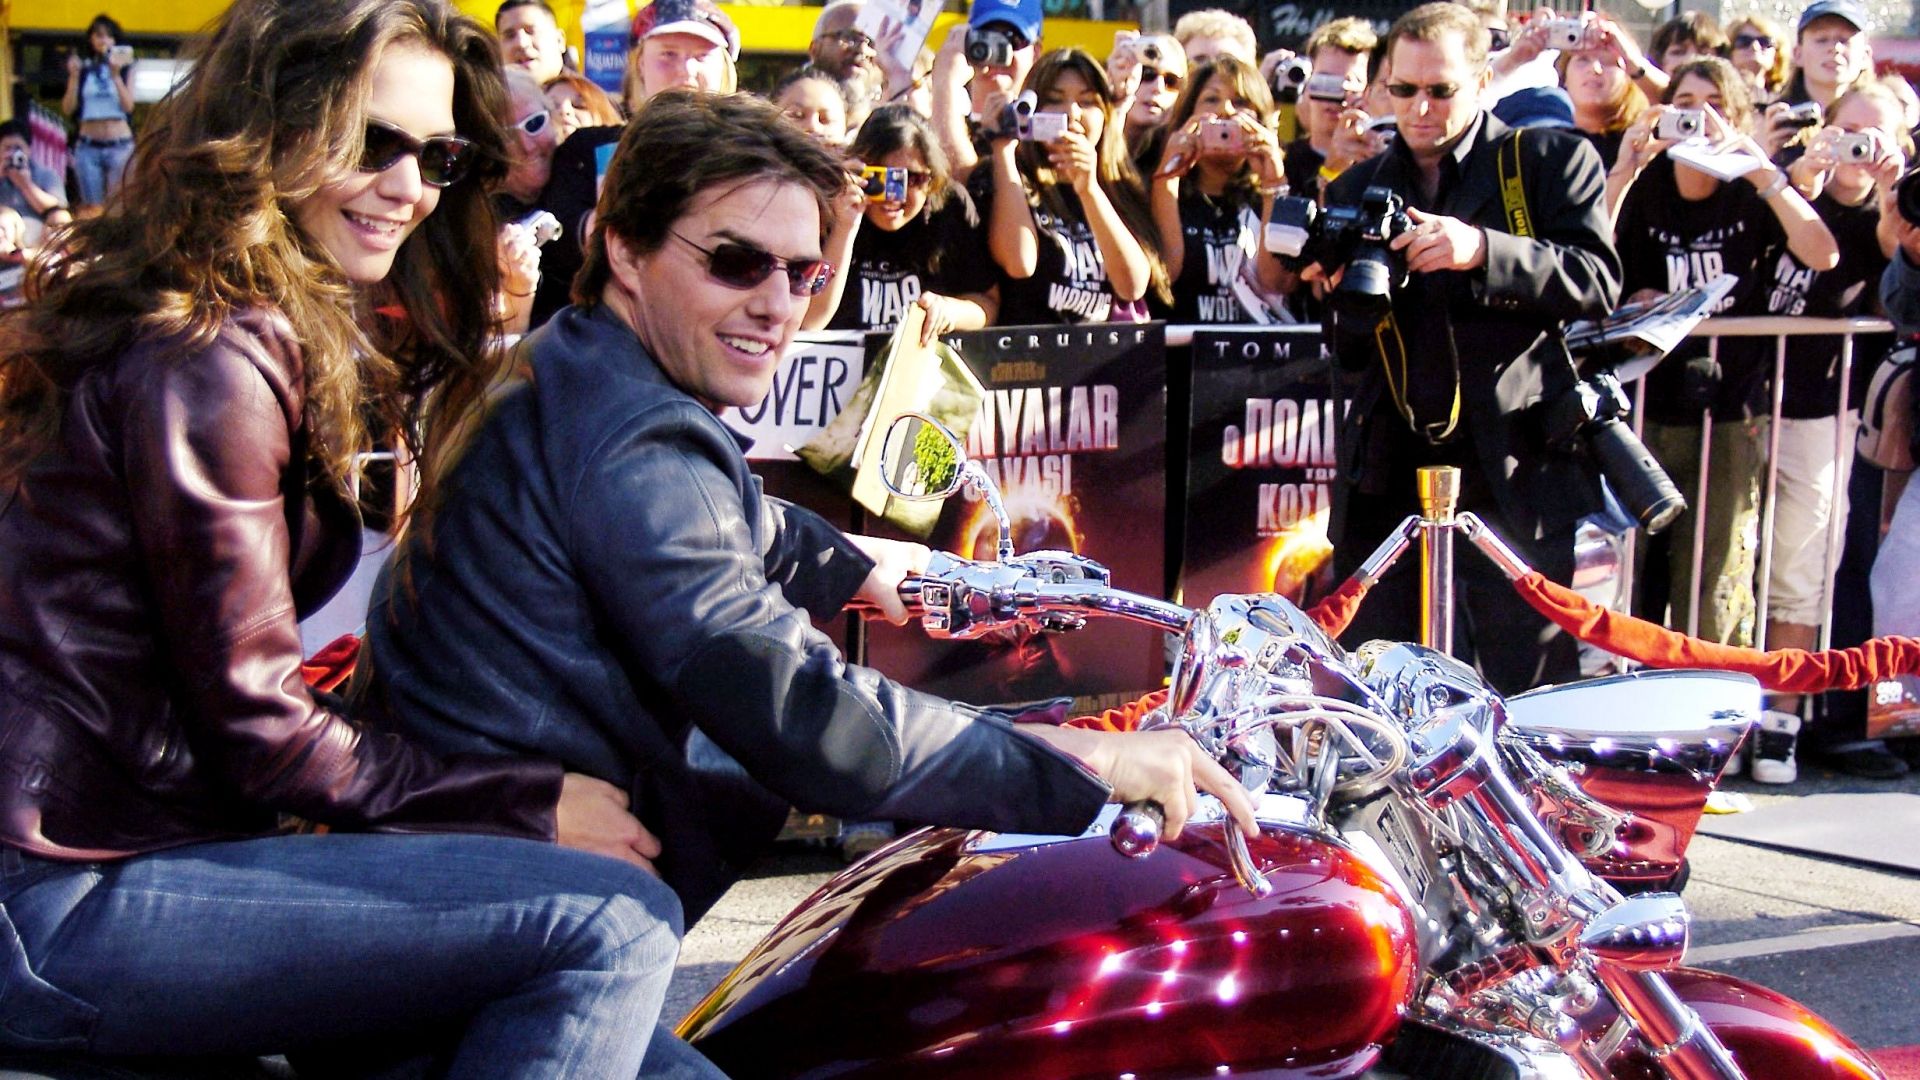 5 Ultra Rare Motorcycles That Tom Cruise Has In His Collection